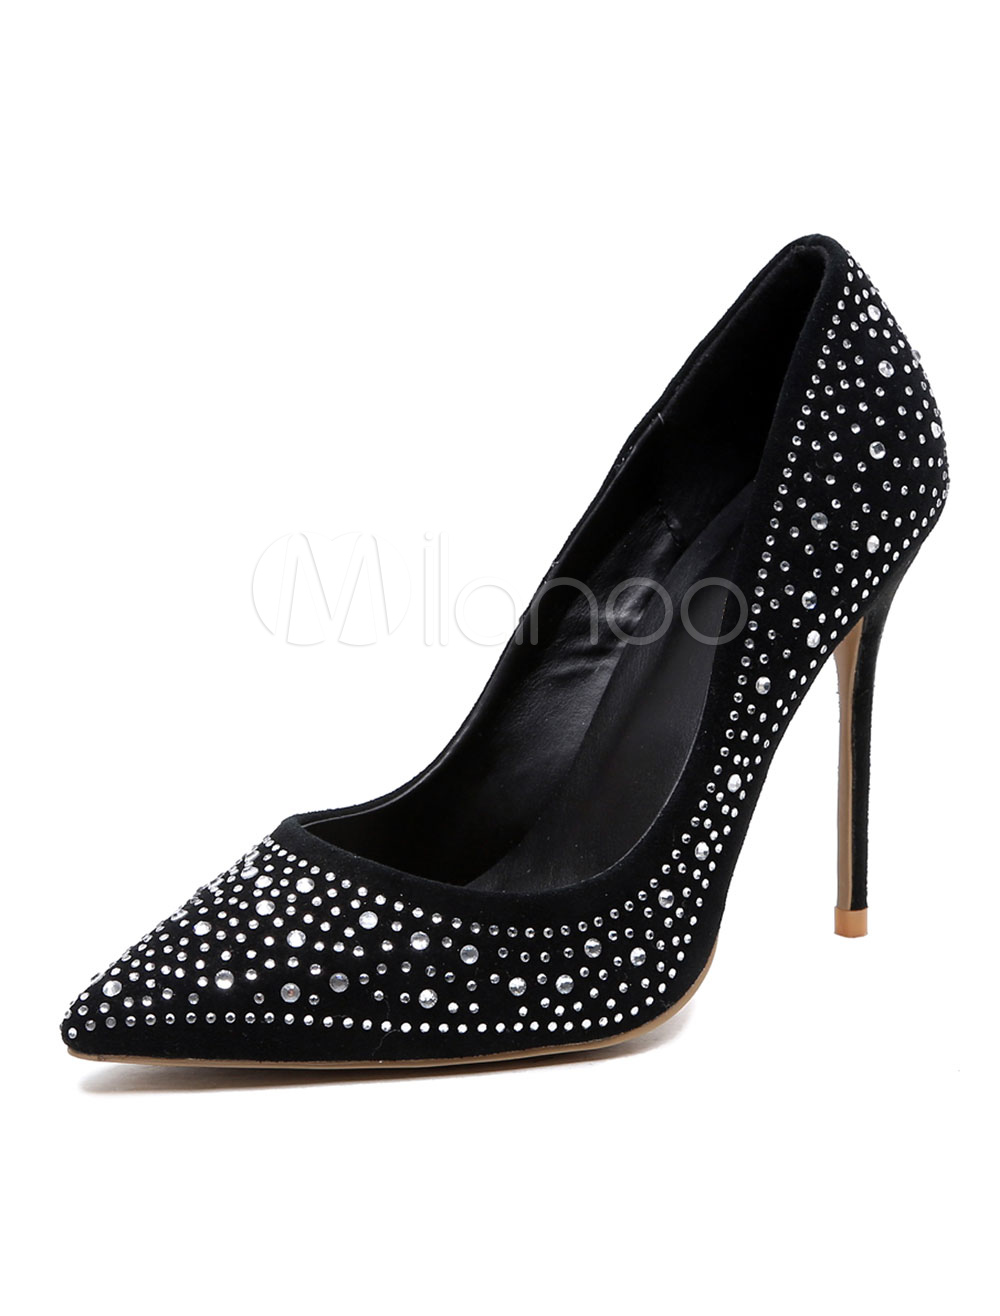 black evening shoes with rhinestones